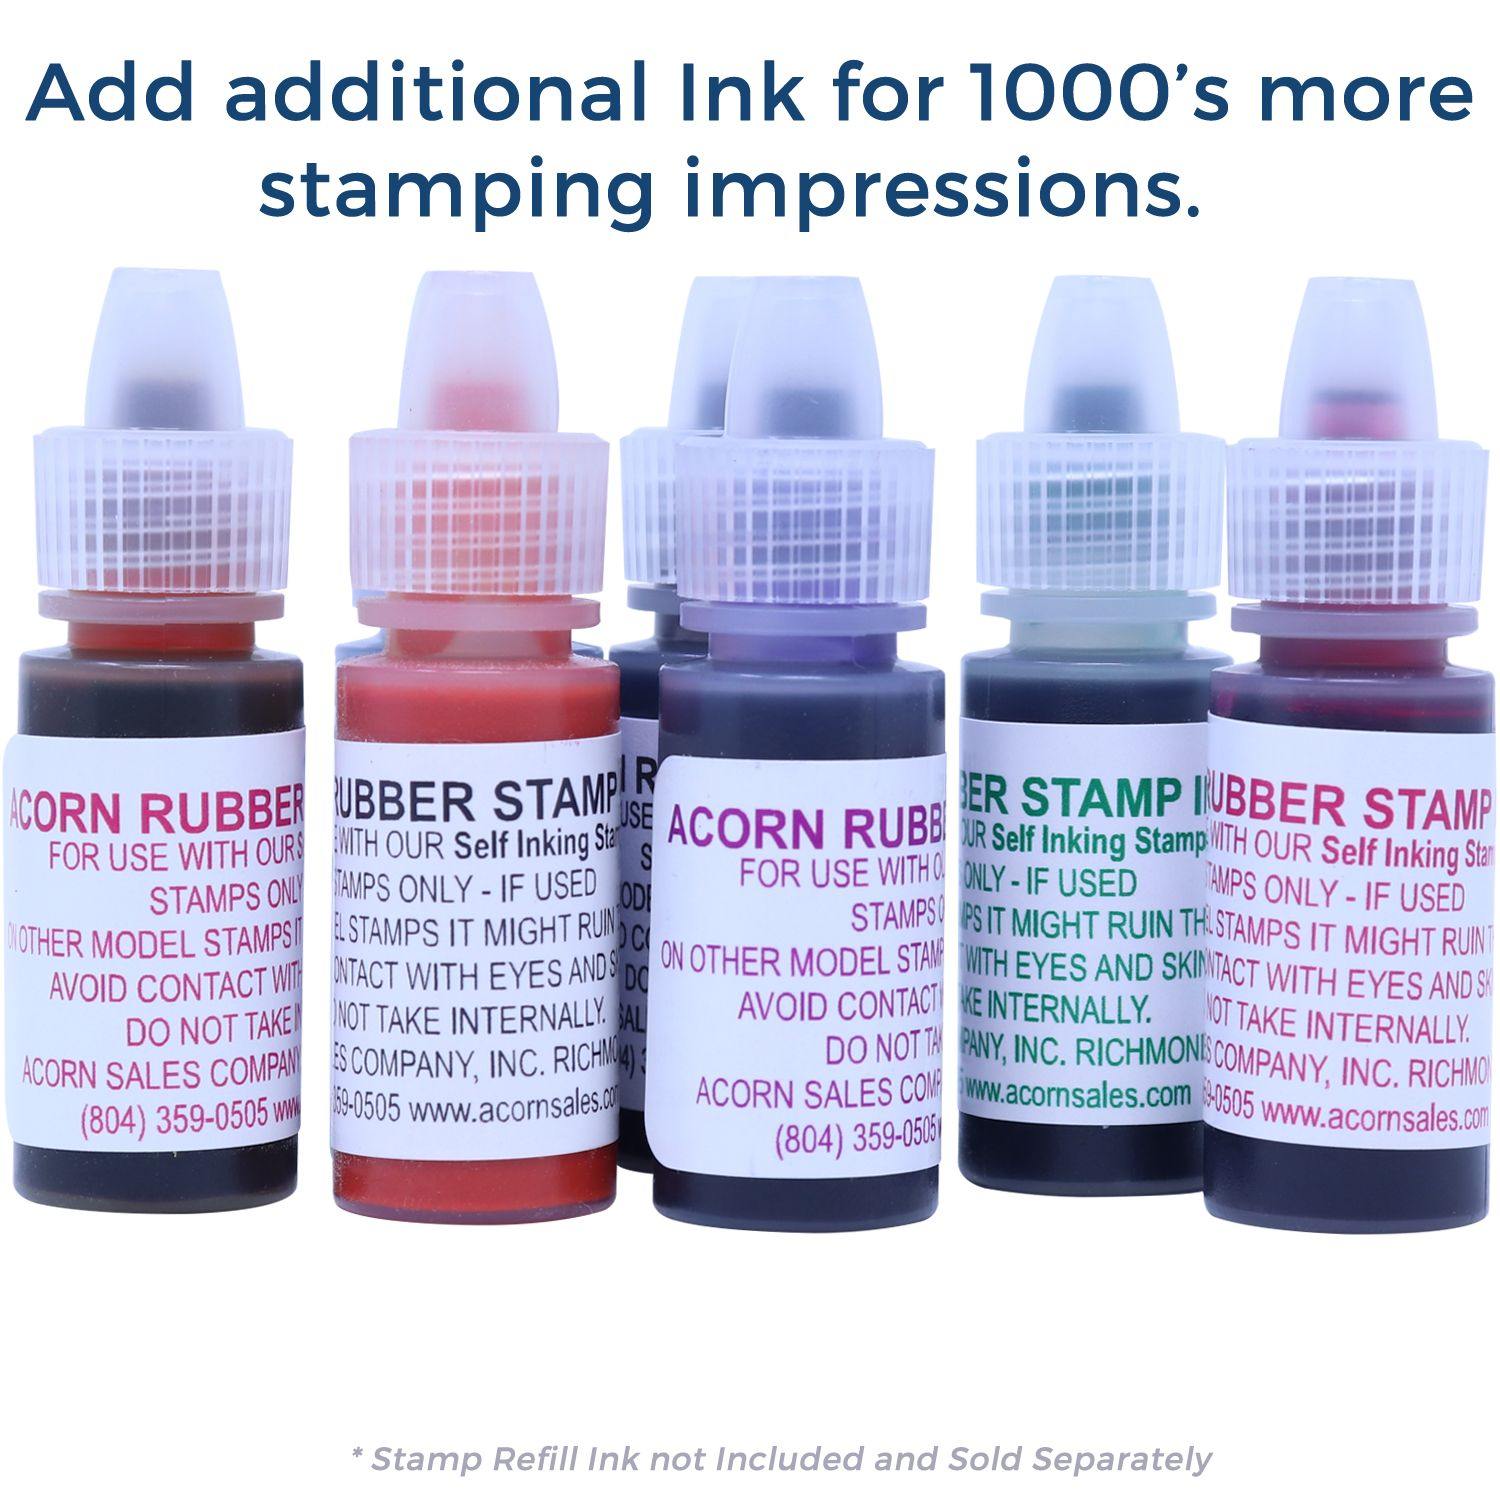 Refill Inks for Large Pre-Inked Attorneys' Copy Stamp Available